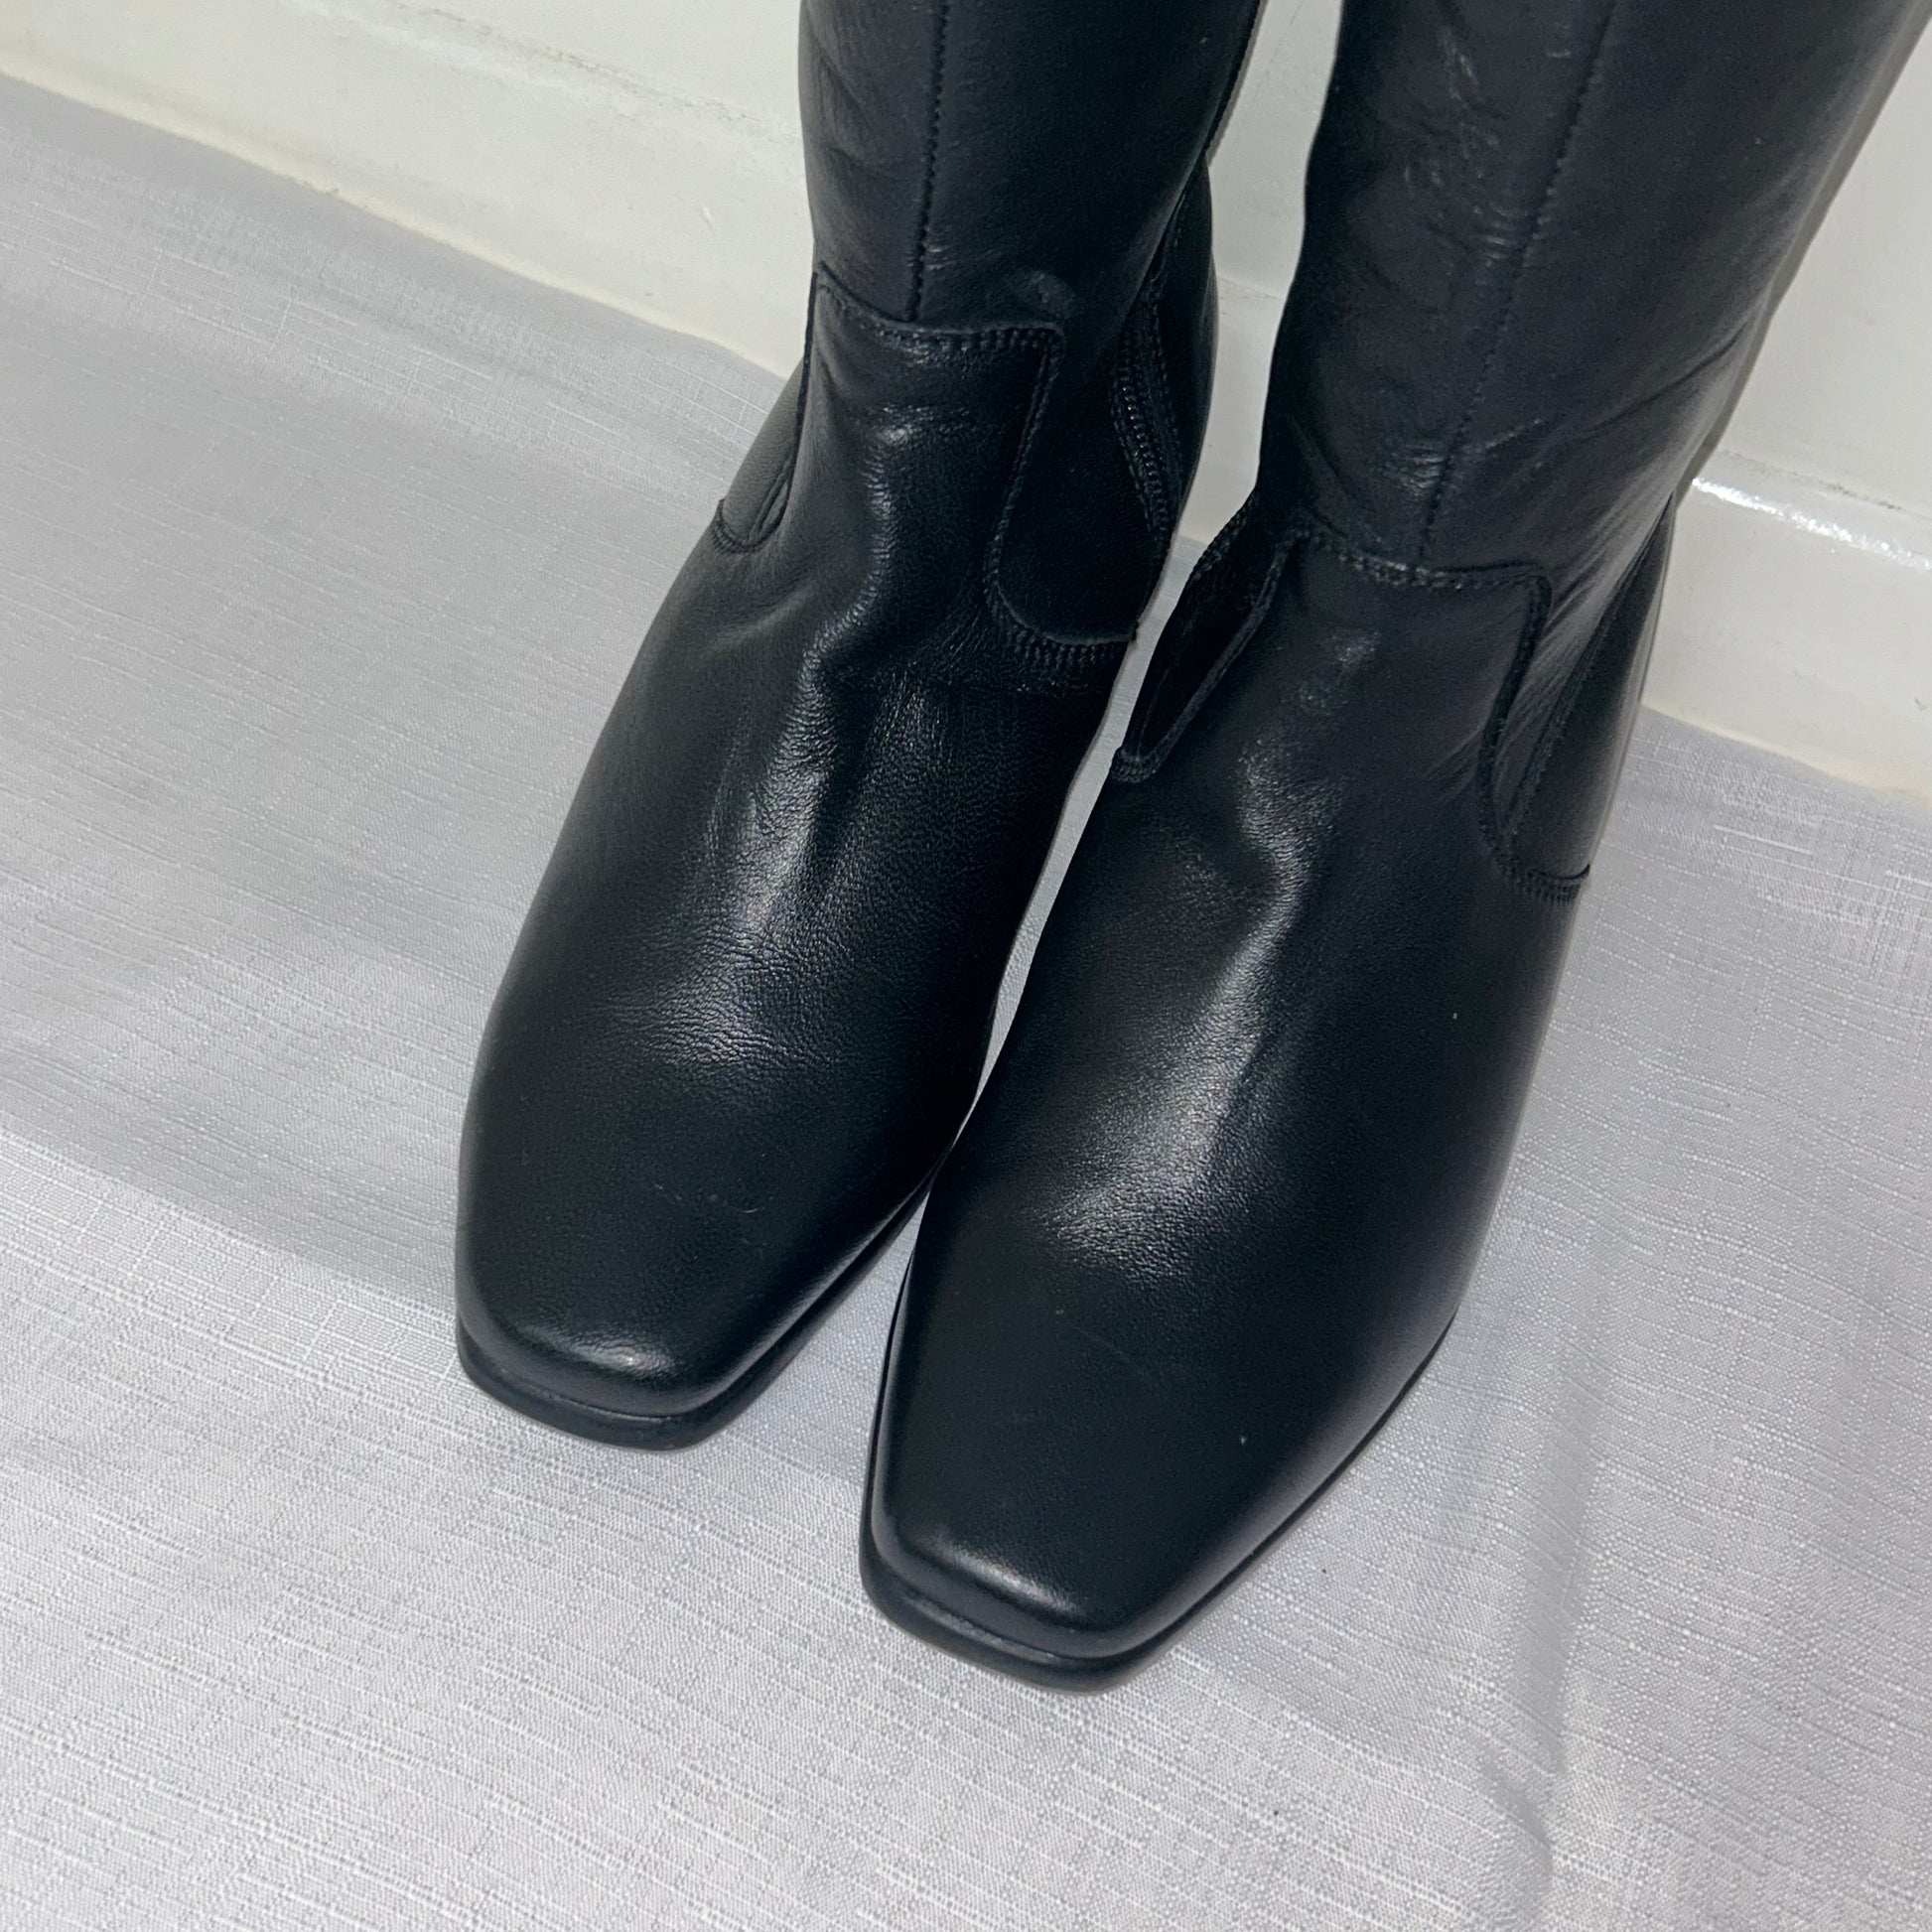 toes of black knee high silver buckle boots shown on a white background